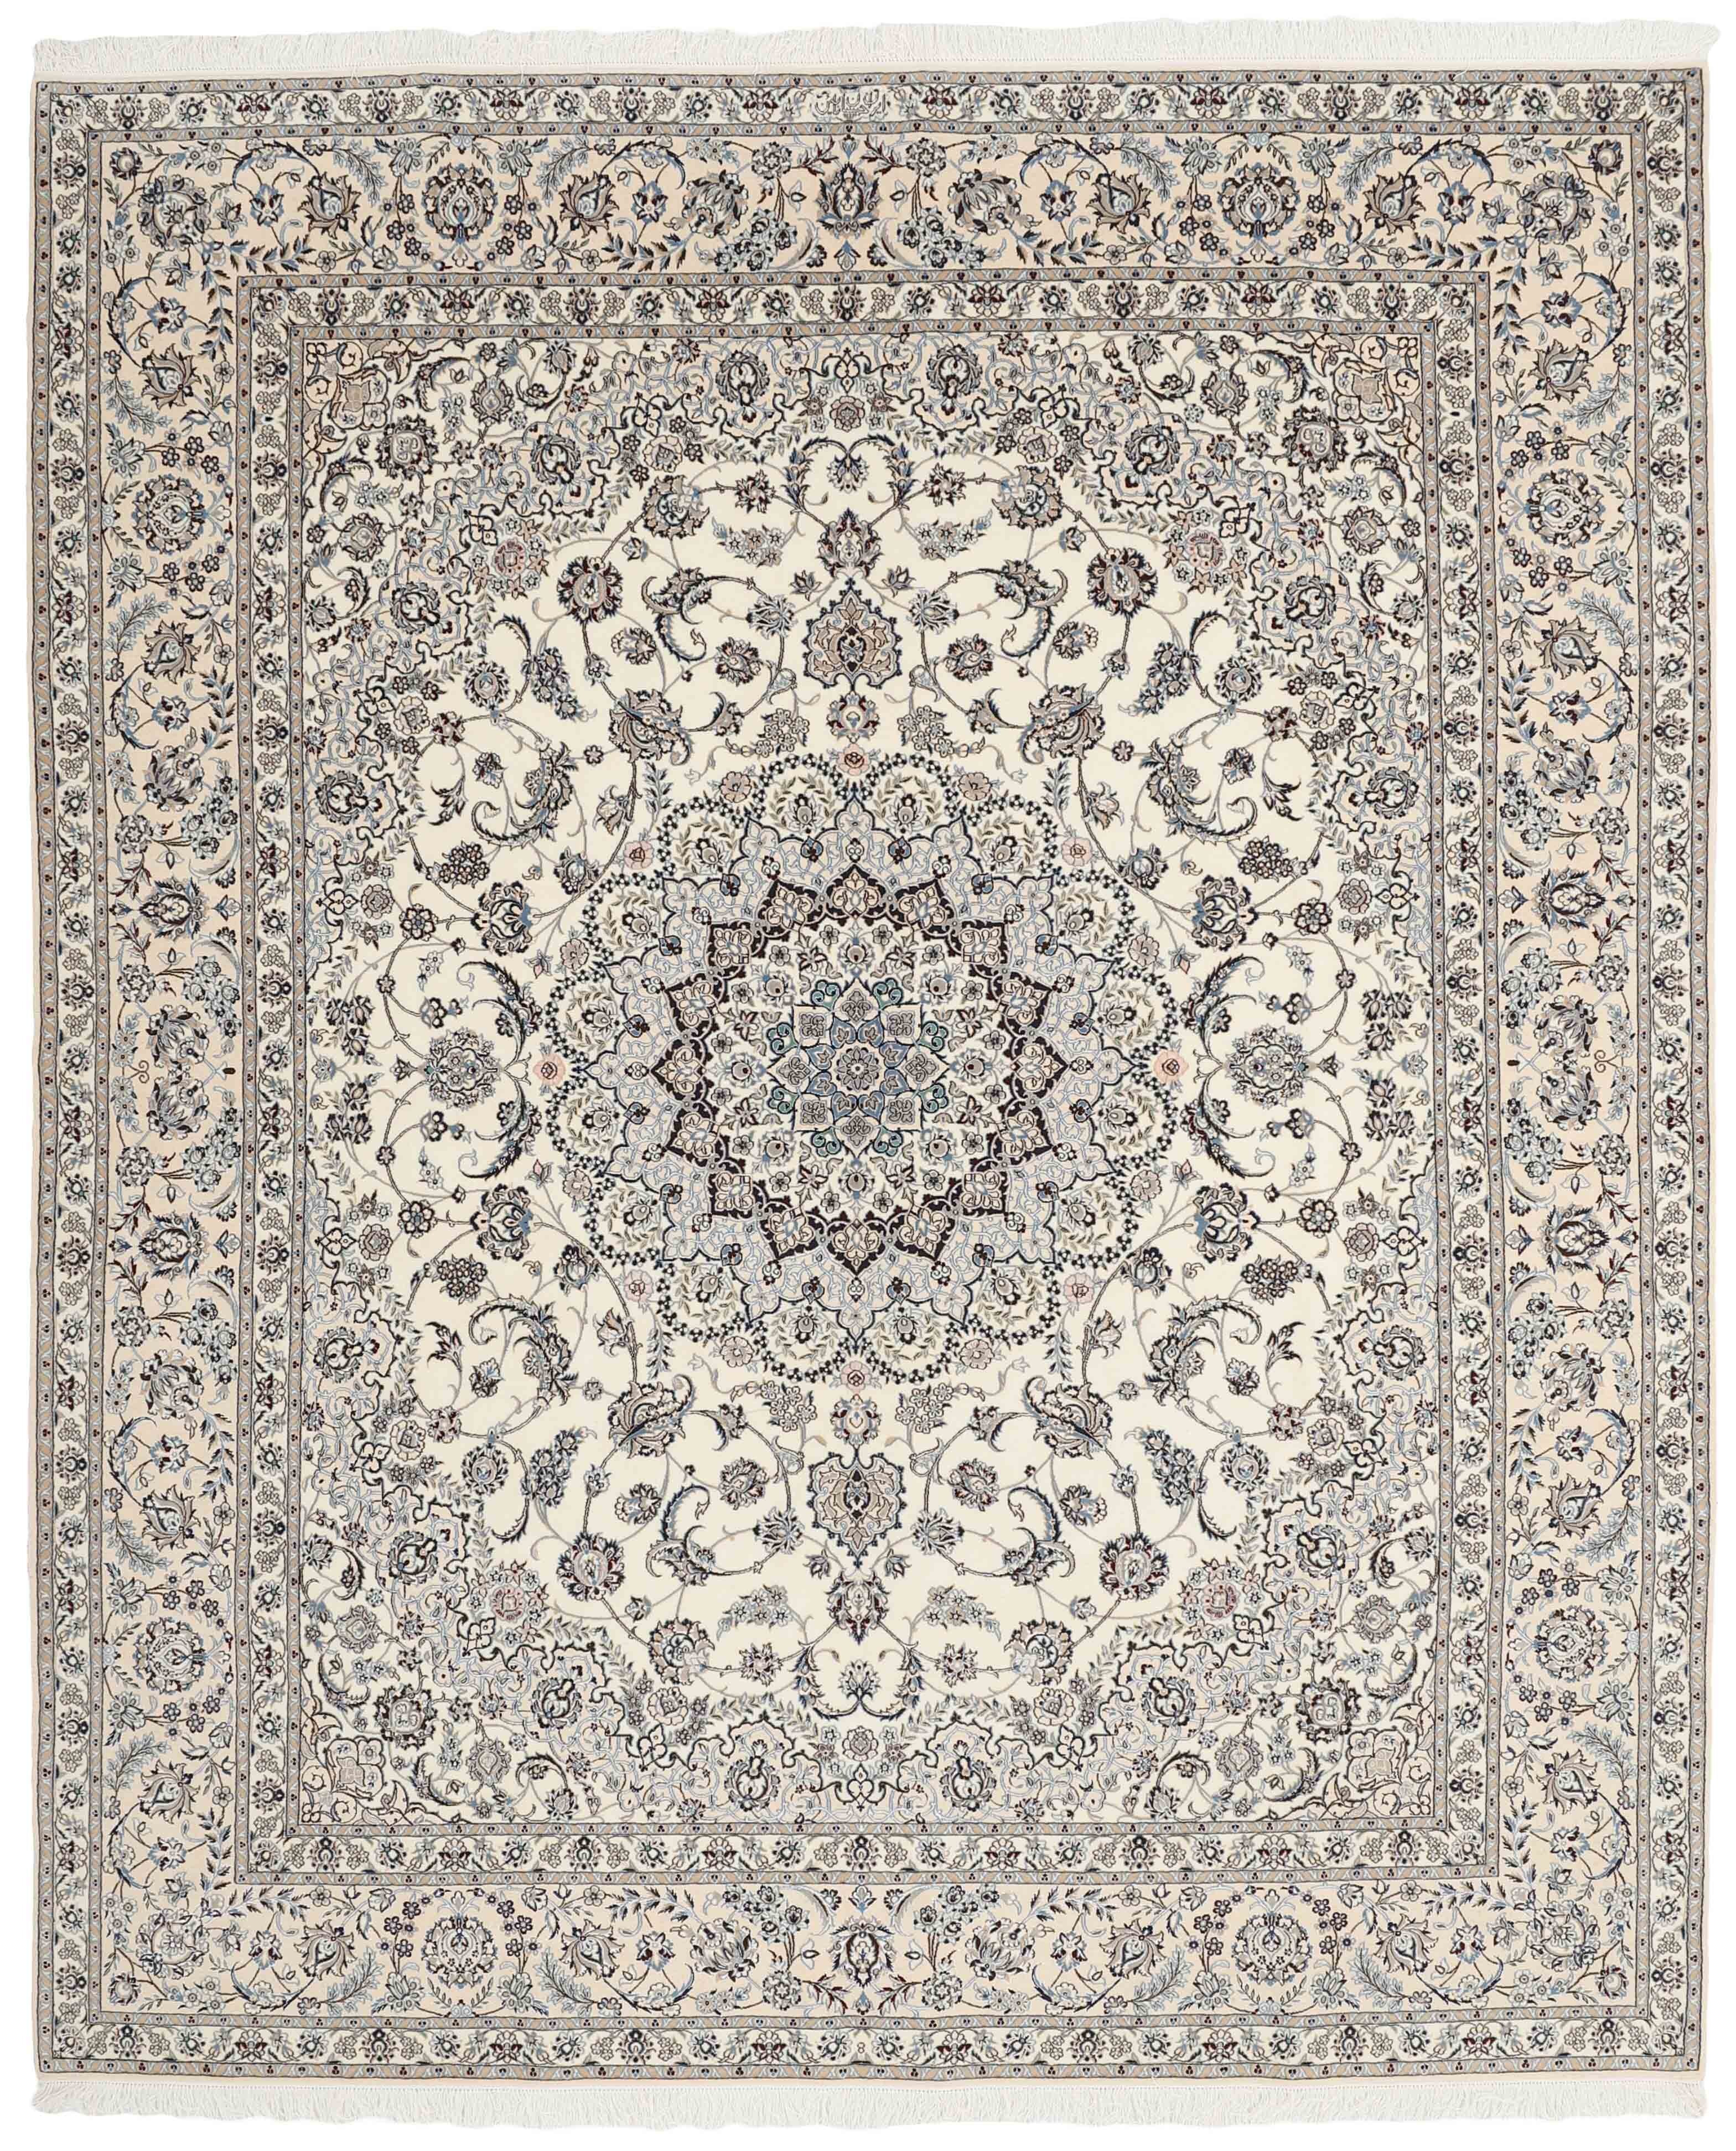 Authentic oriental rug with traditional floral design in cream, red and blue